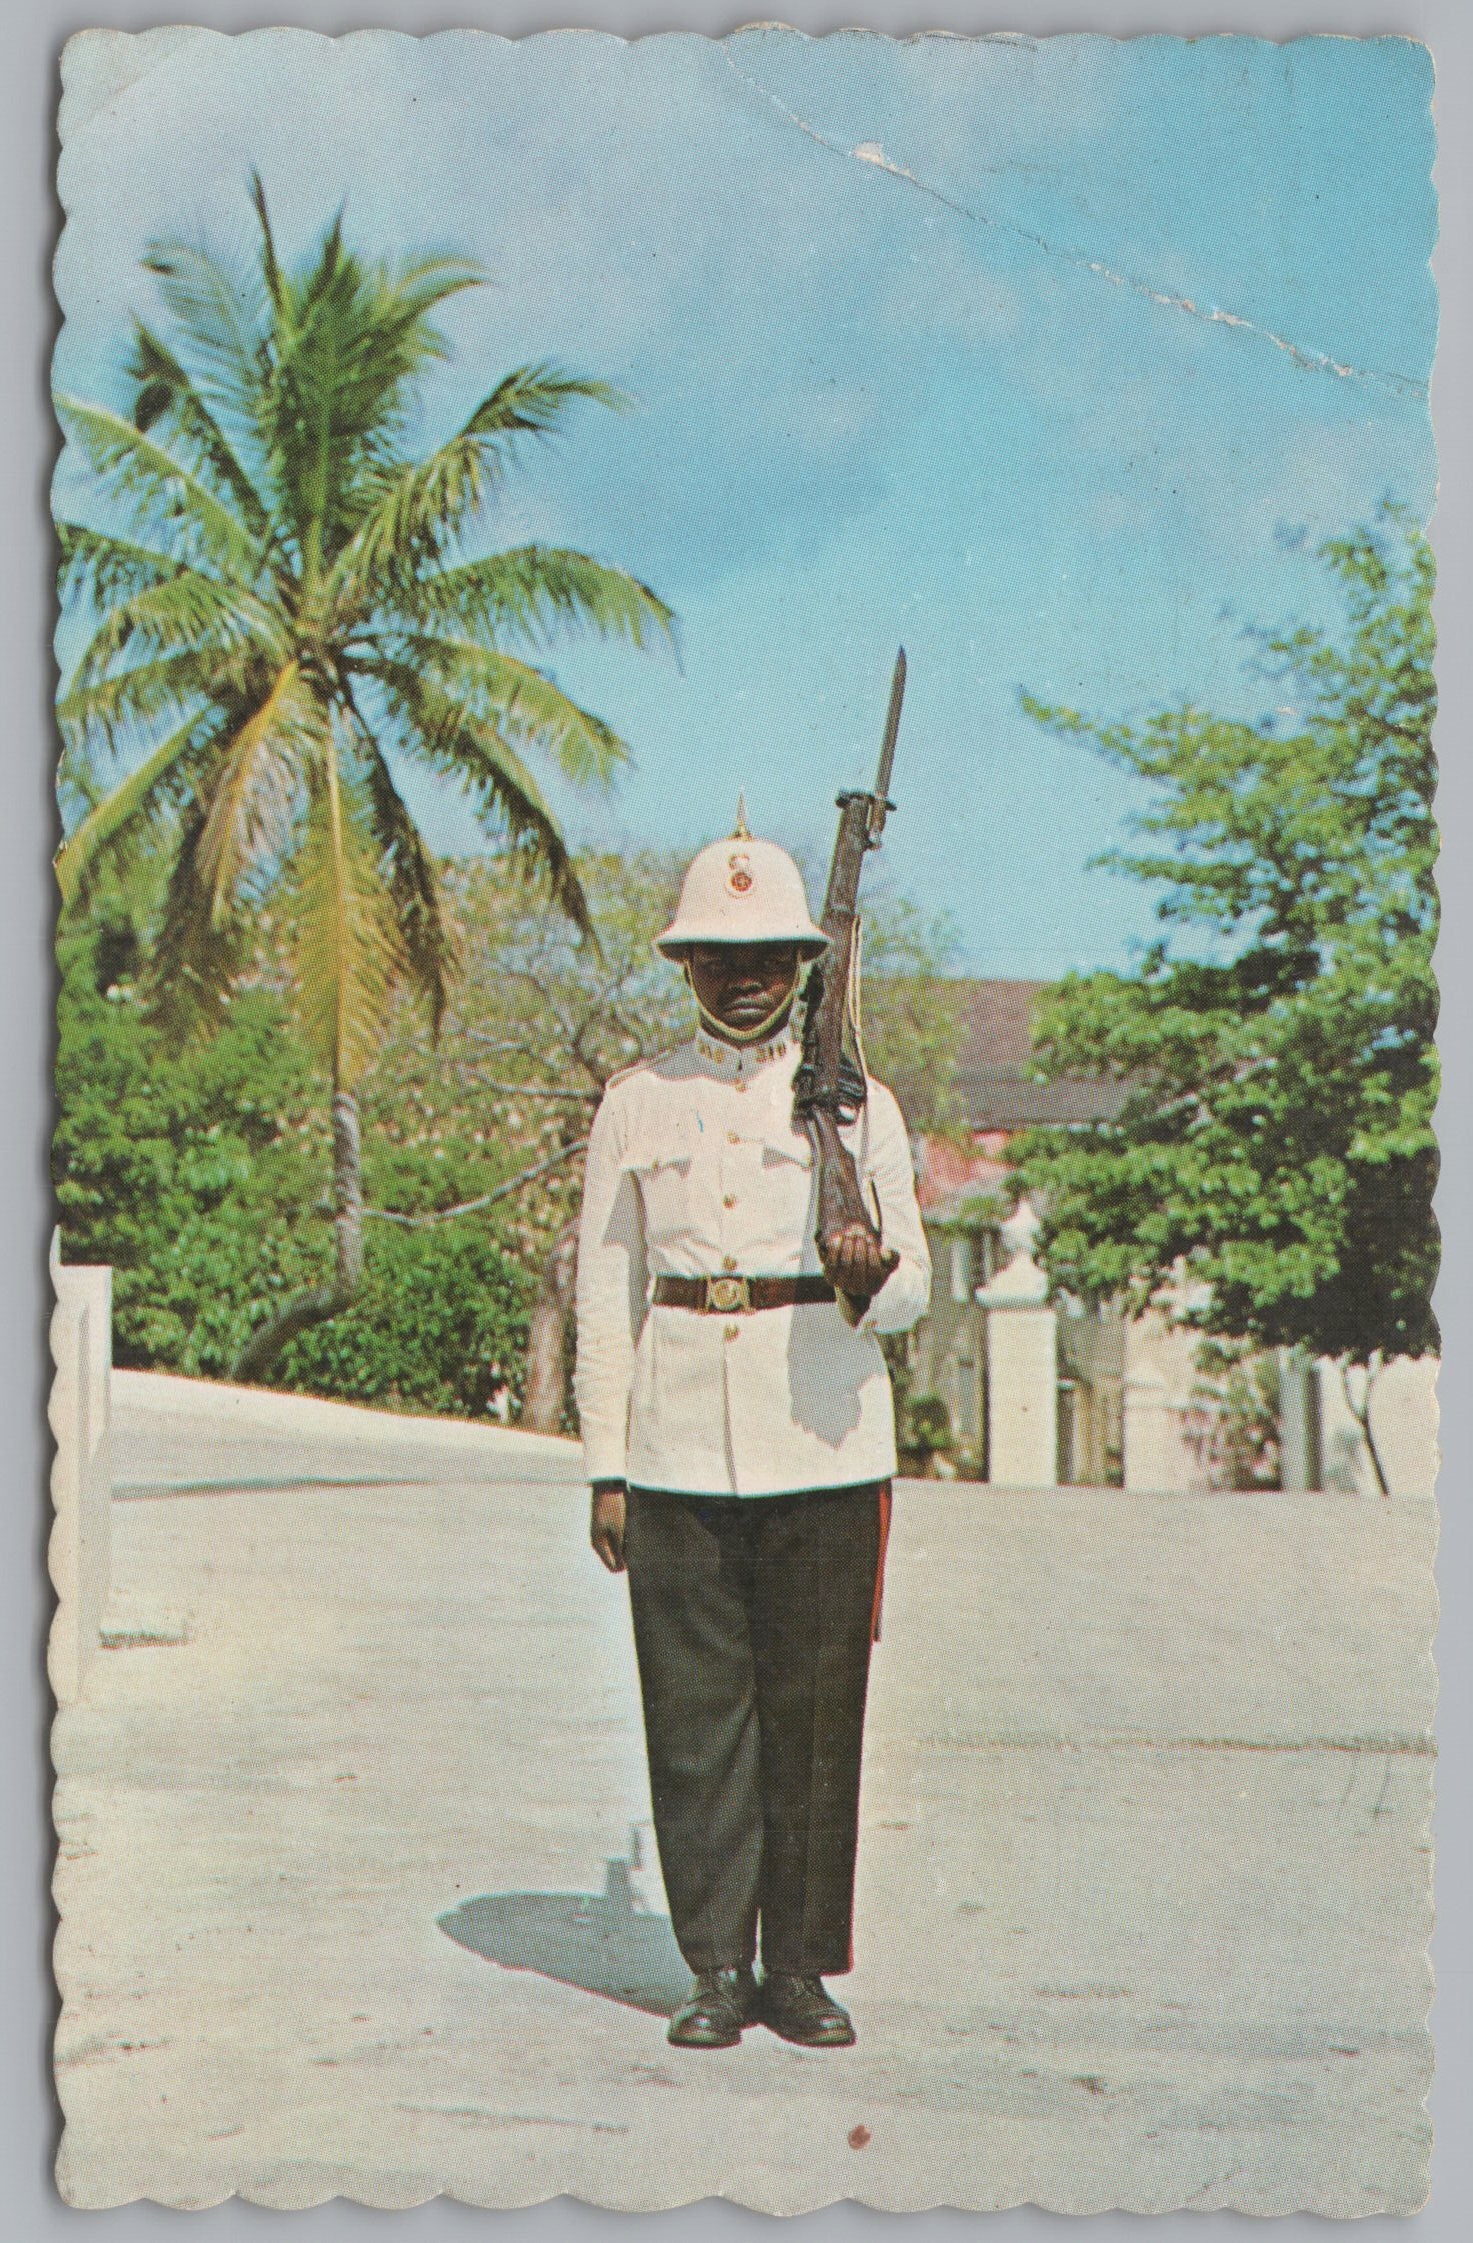 Police Guard, Government House, Nassau In The Bahamas, Vintage Post Card.